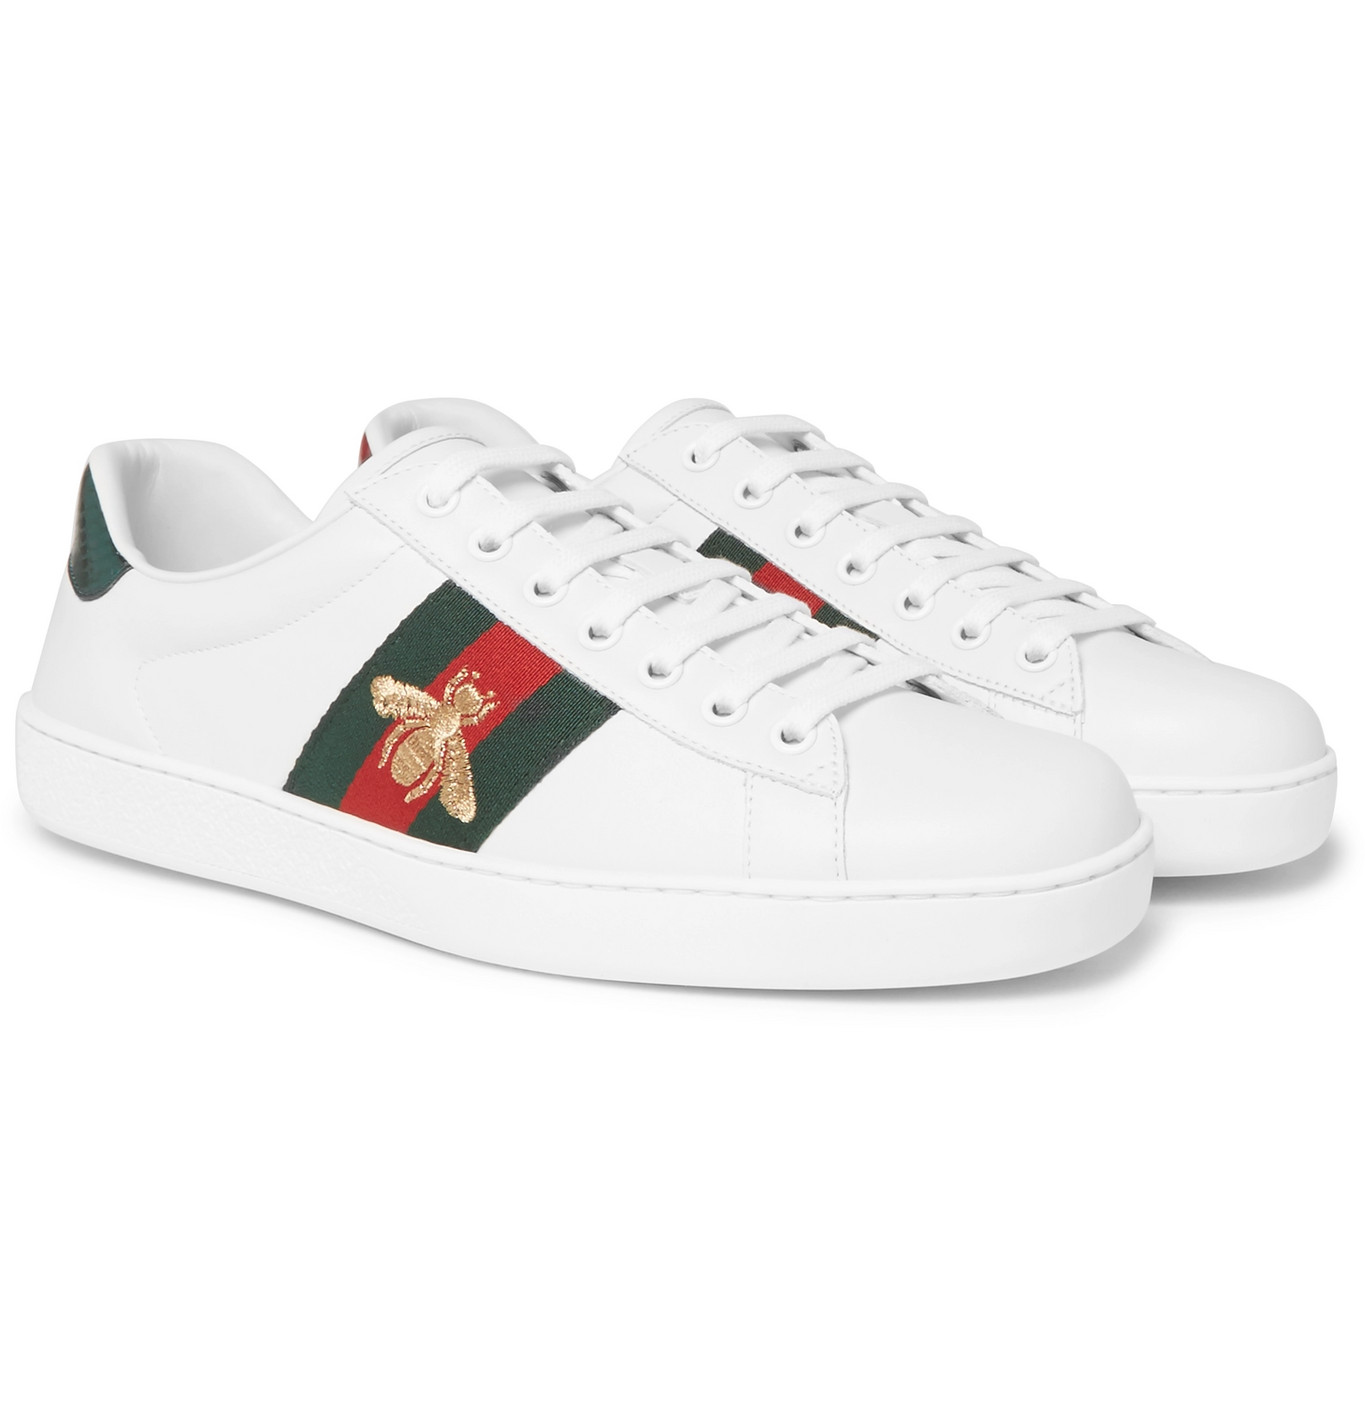 Gucci - Ace Watersnake-Trimmed 